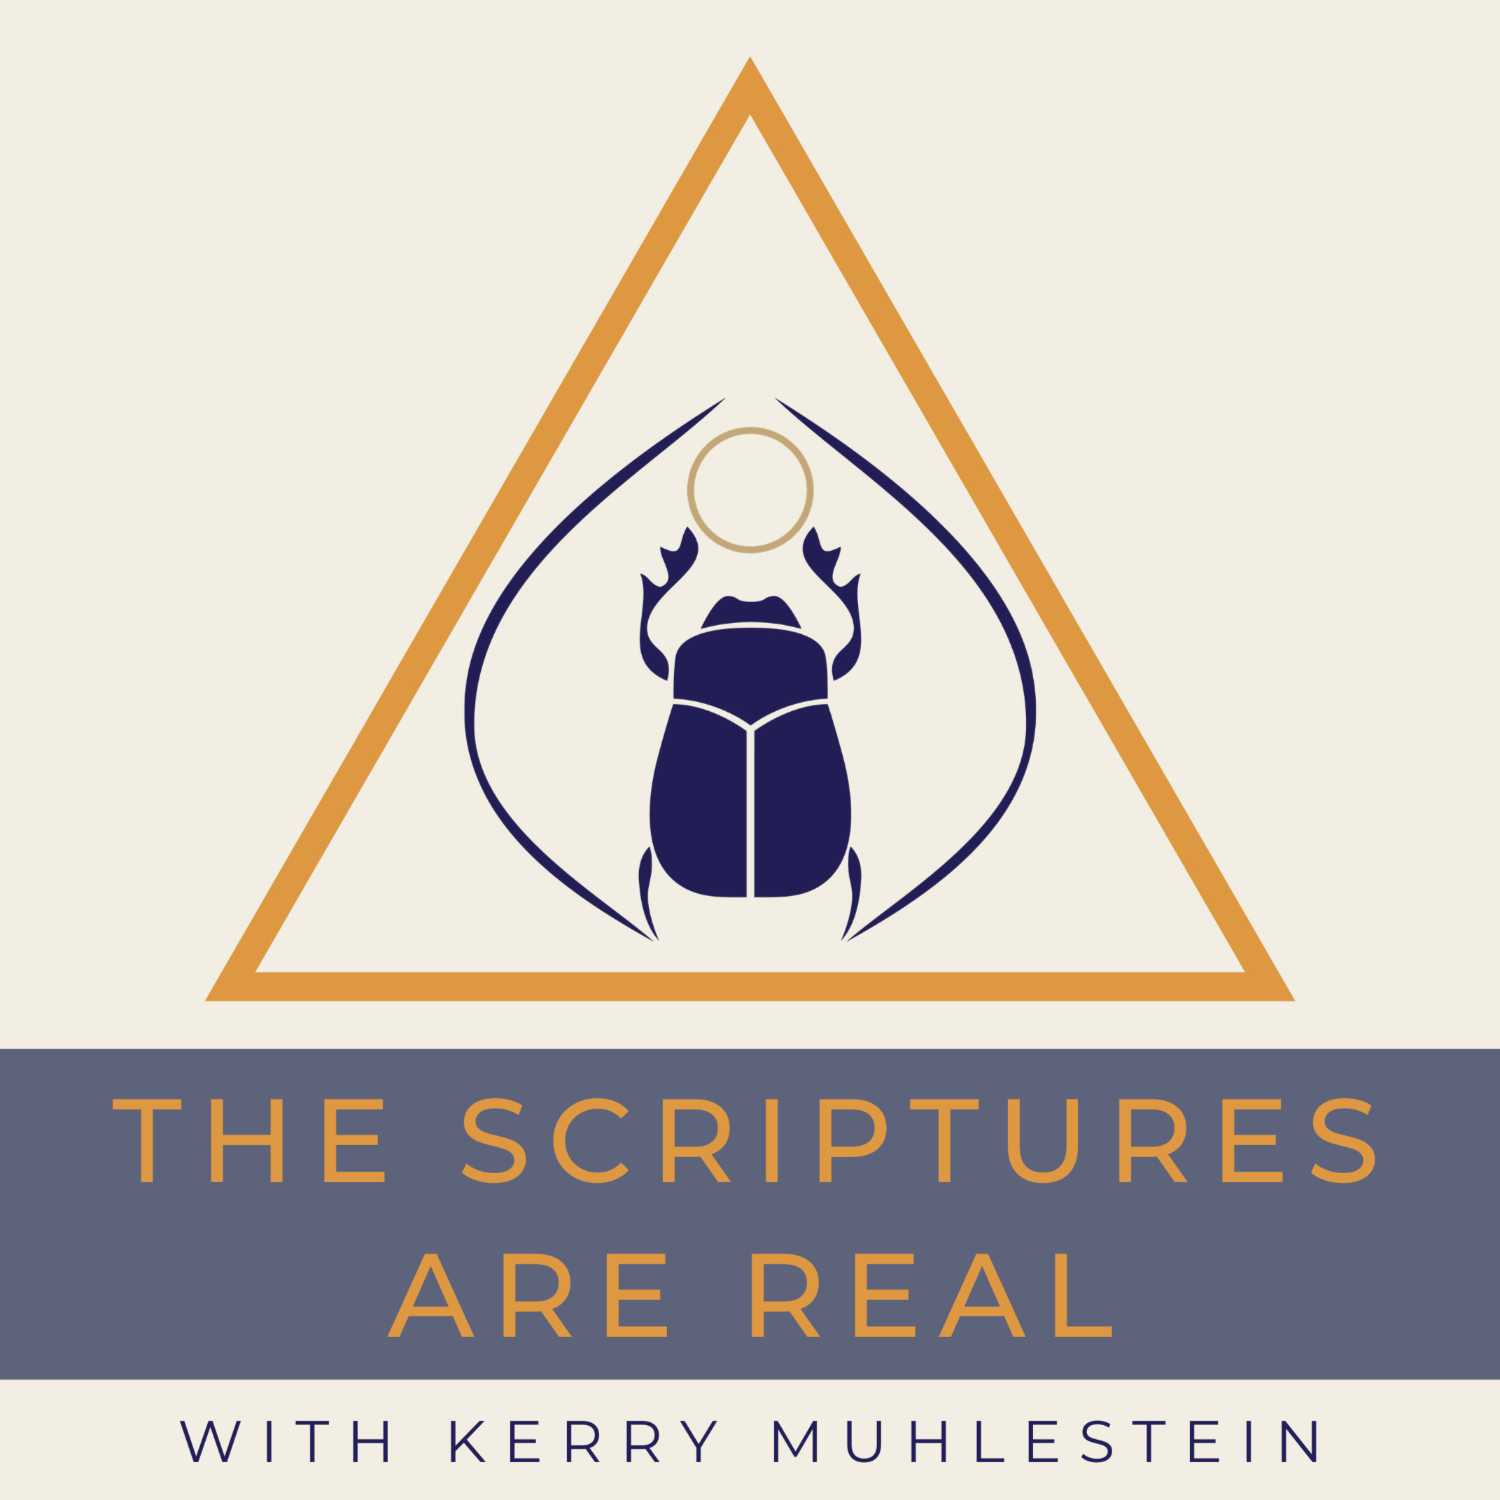 Gaye Strathearn on Galatians, Godly Growth, Godly Love and Godly Laws  (week of Sept. 24, second episode)